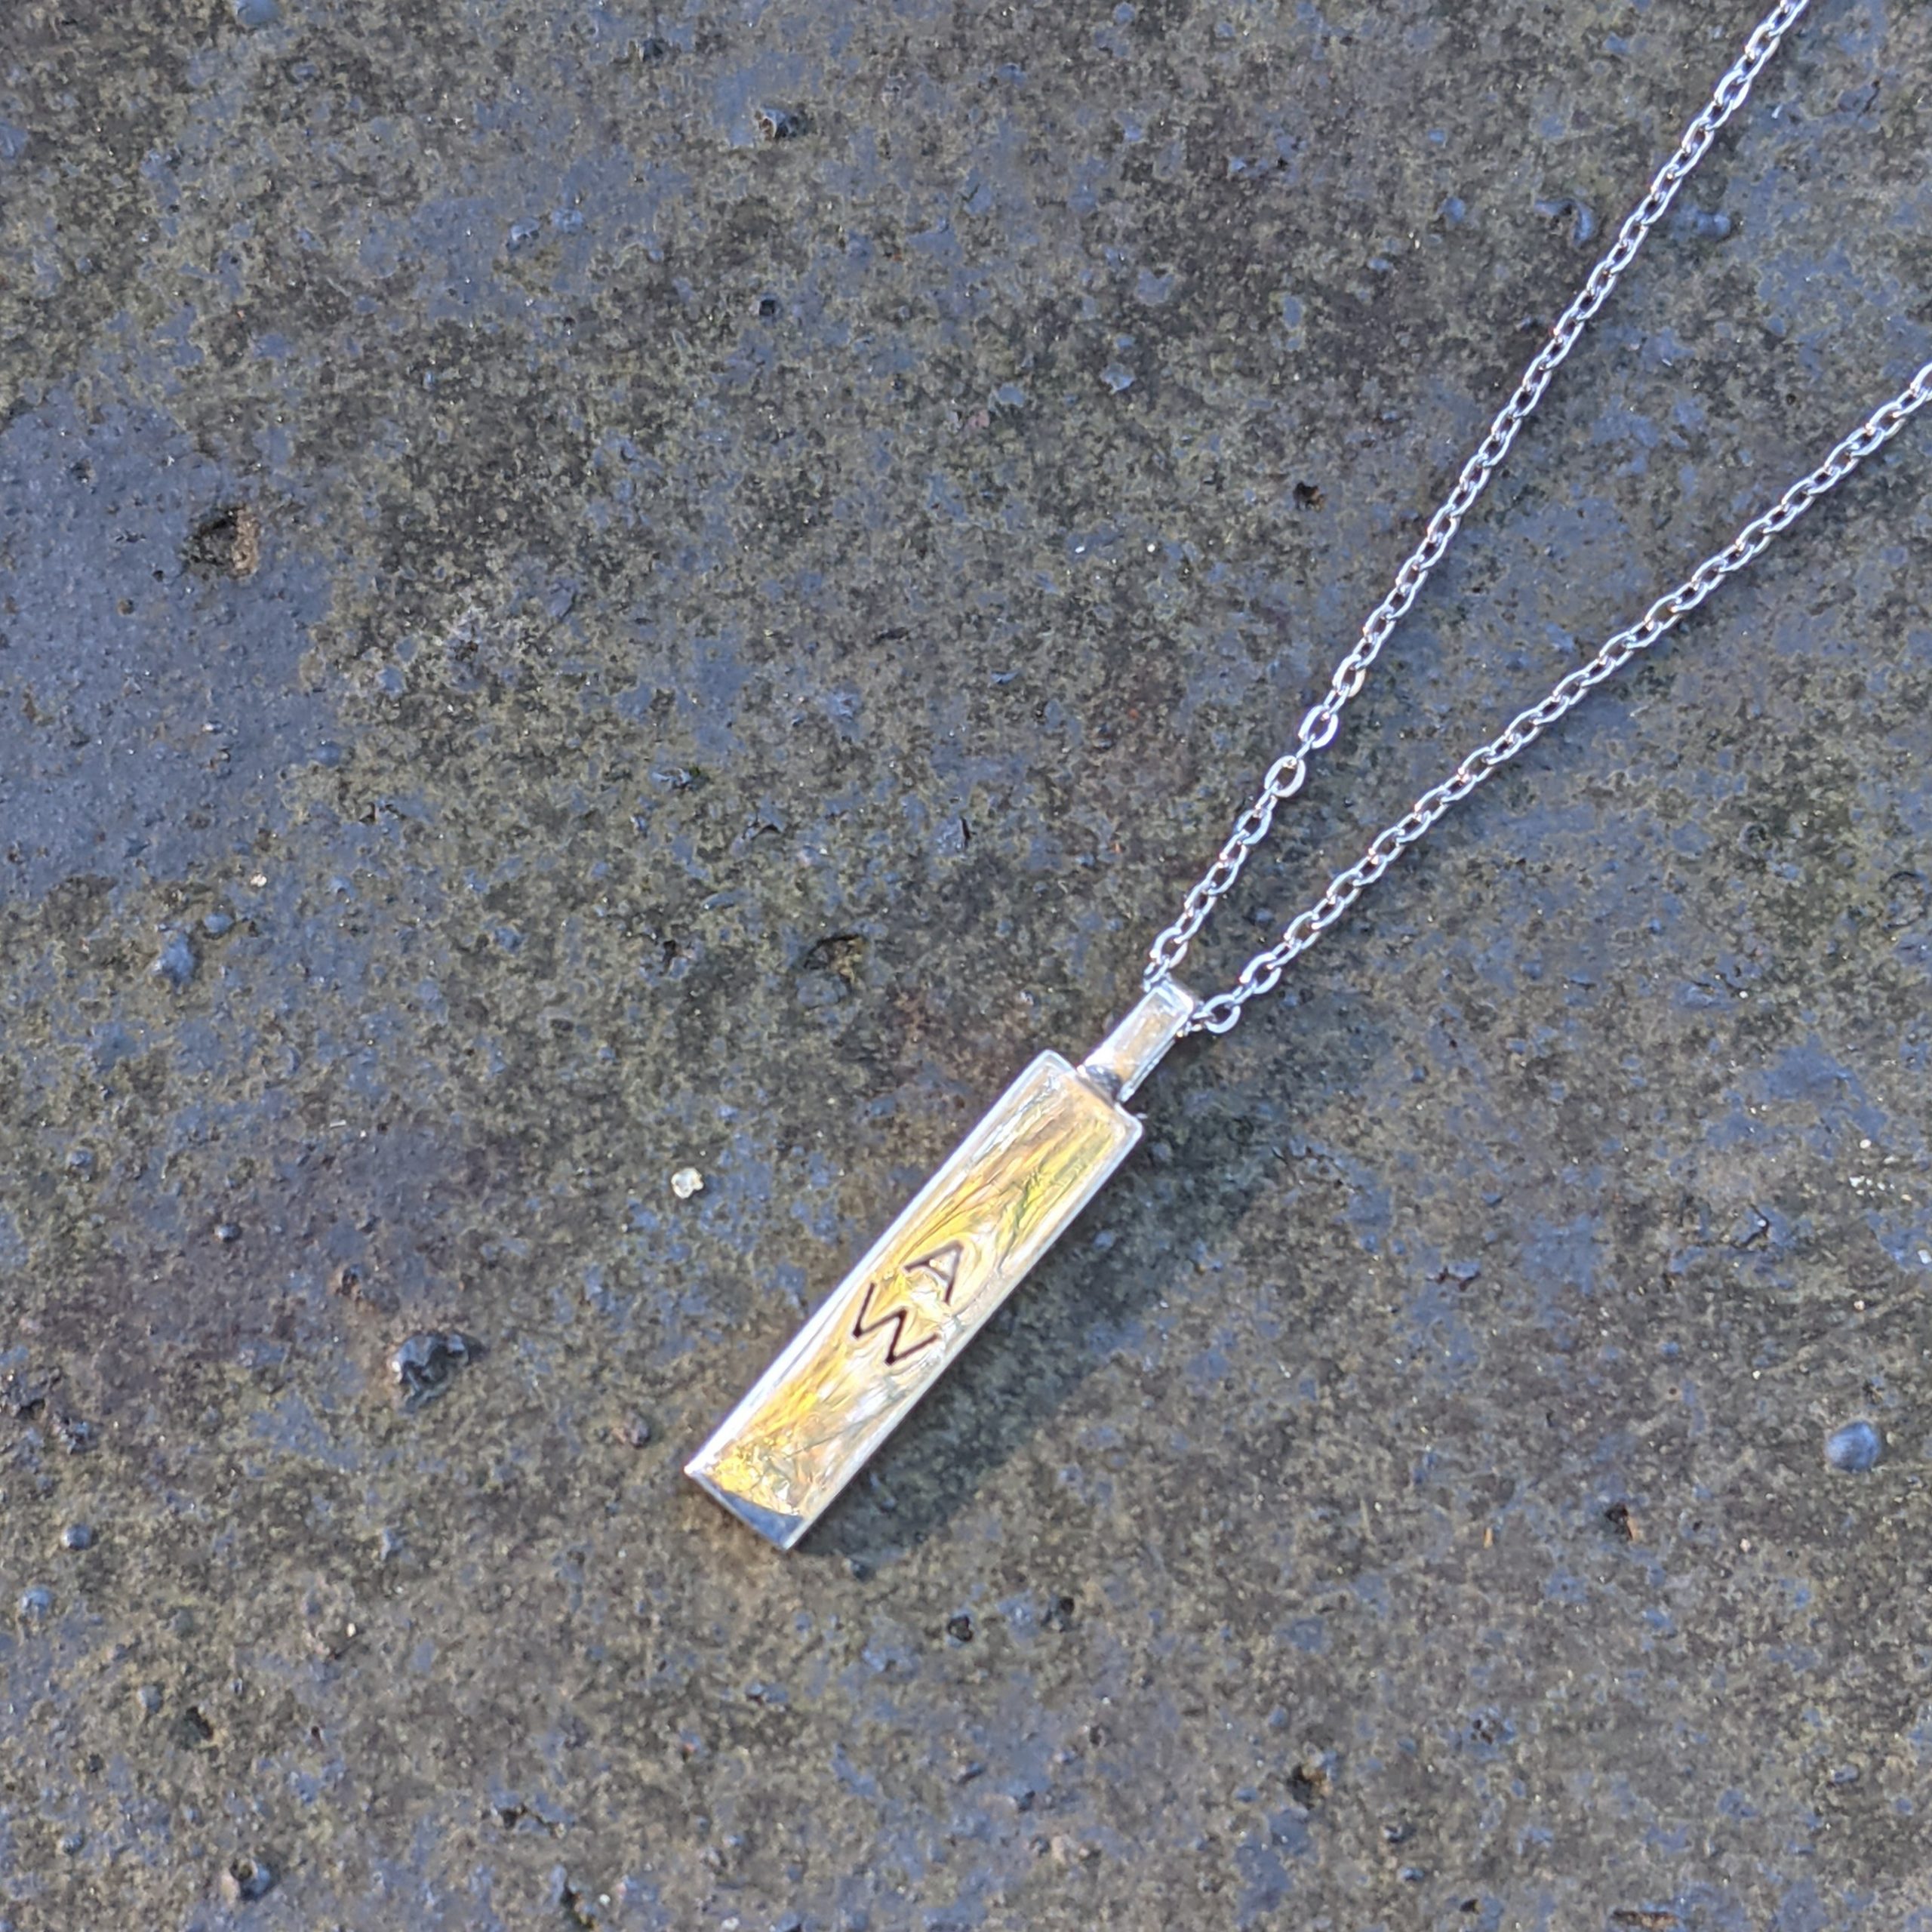 mens-personalised-pendant-necklaces-uk-925-sterling-silver-gold-mens-jewellery-mens-gifts-gifts-for-him